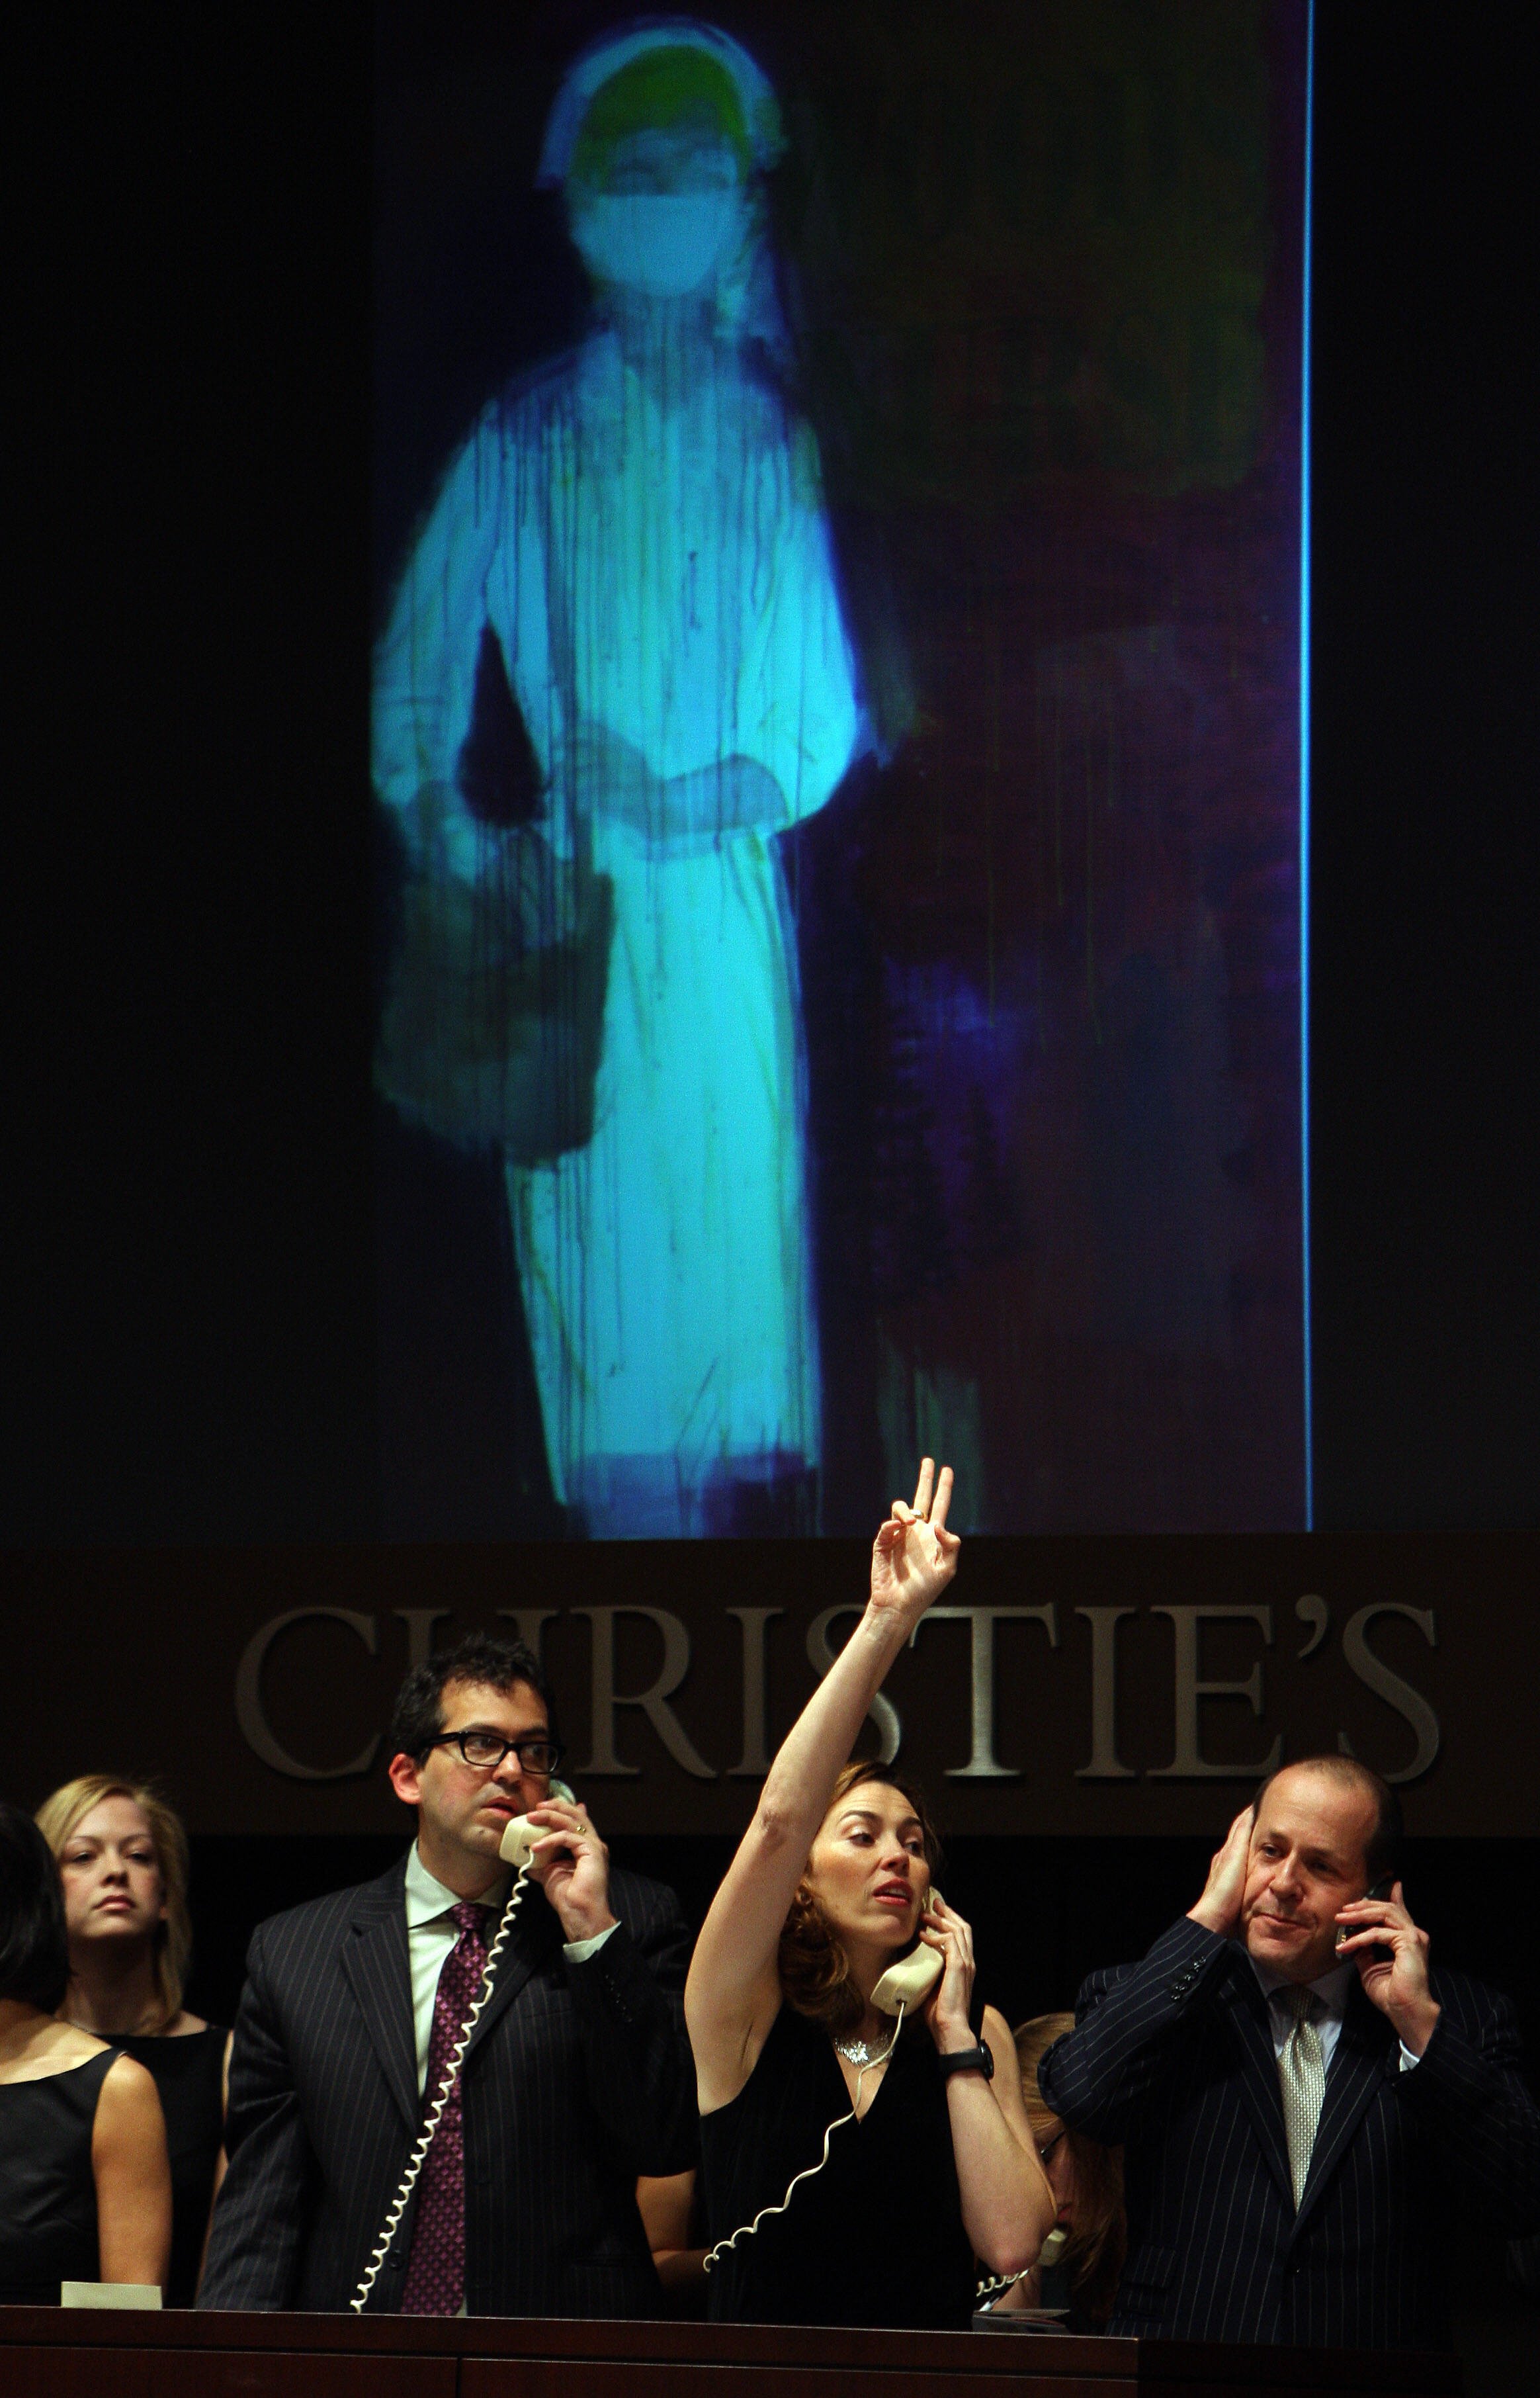 Christie's auction house staff place bids received over the phone for "Piney Woods Nurse" by artist Richard Prince during Christie's bi-annual Post-War and Contemporary Art Sale in New York, 13 November 2007. A phone bidder paid 5.4 million USD prior premium, while the work had been estimated to sell for 1.8-2.2 million USD. Christie's sale reached a total of 325 million USD from an estimate of 242 to 338 million USD. Courtesy of EMMANUEL DUNAND/AFP/Getty Images.